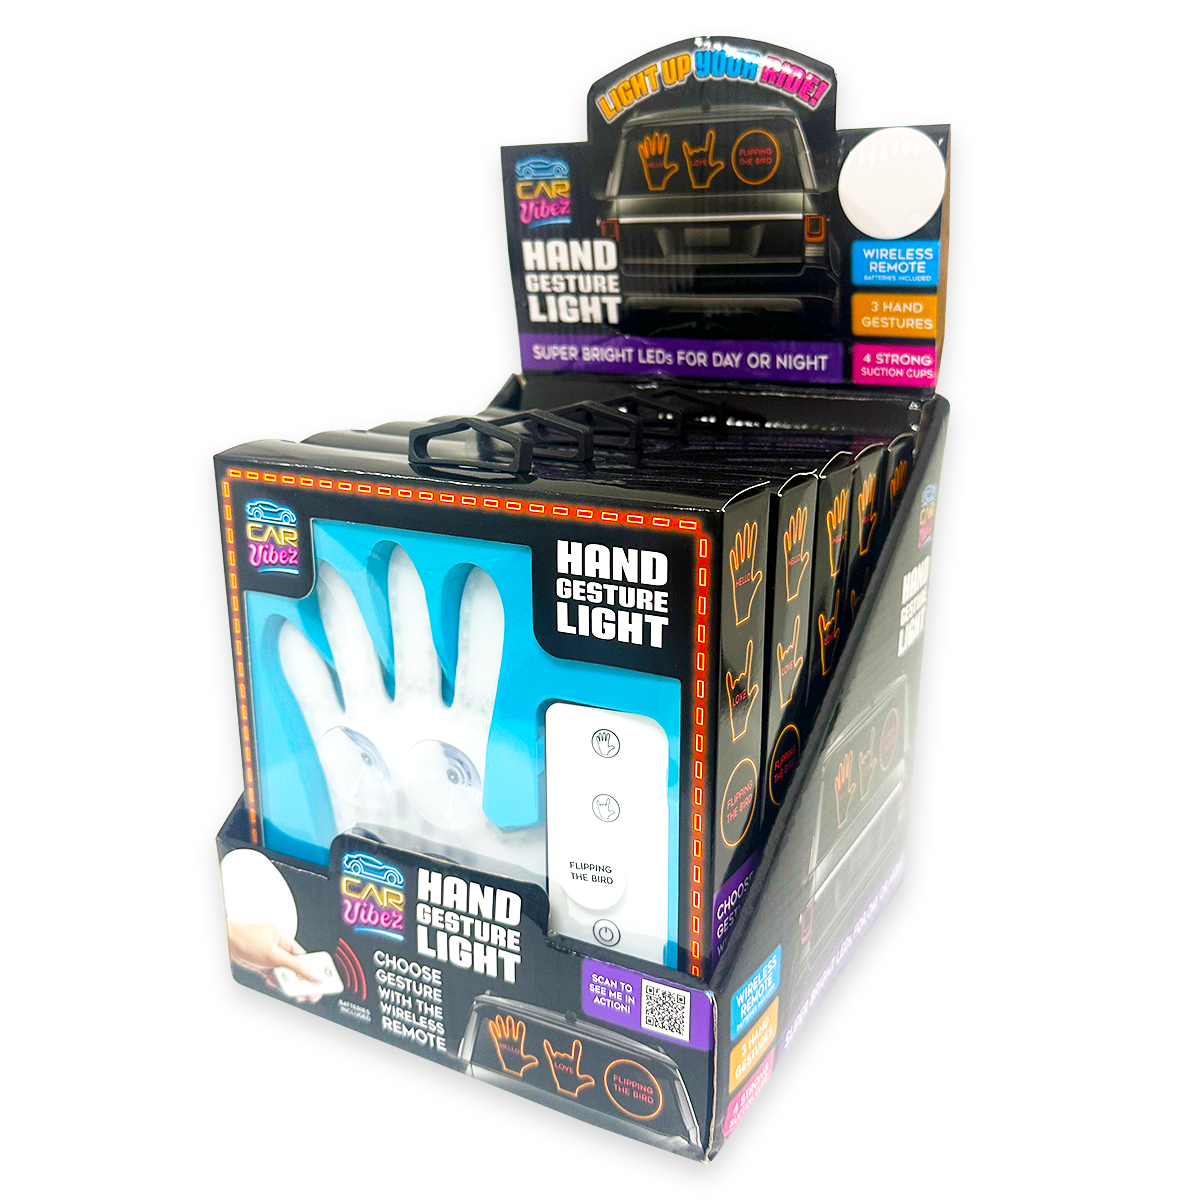 ITEM NUMBER 024454 HAND GESTURE LIGHT 6 PIECES PER DISPLAY – Novelty  Closeout